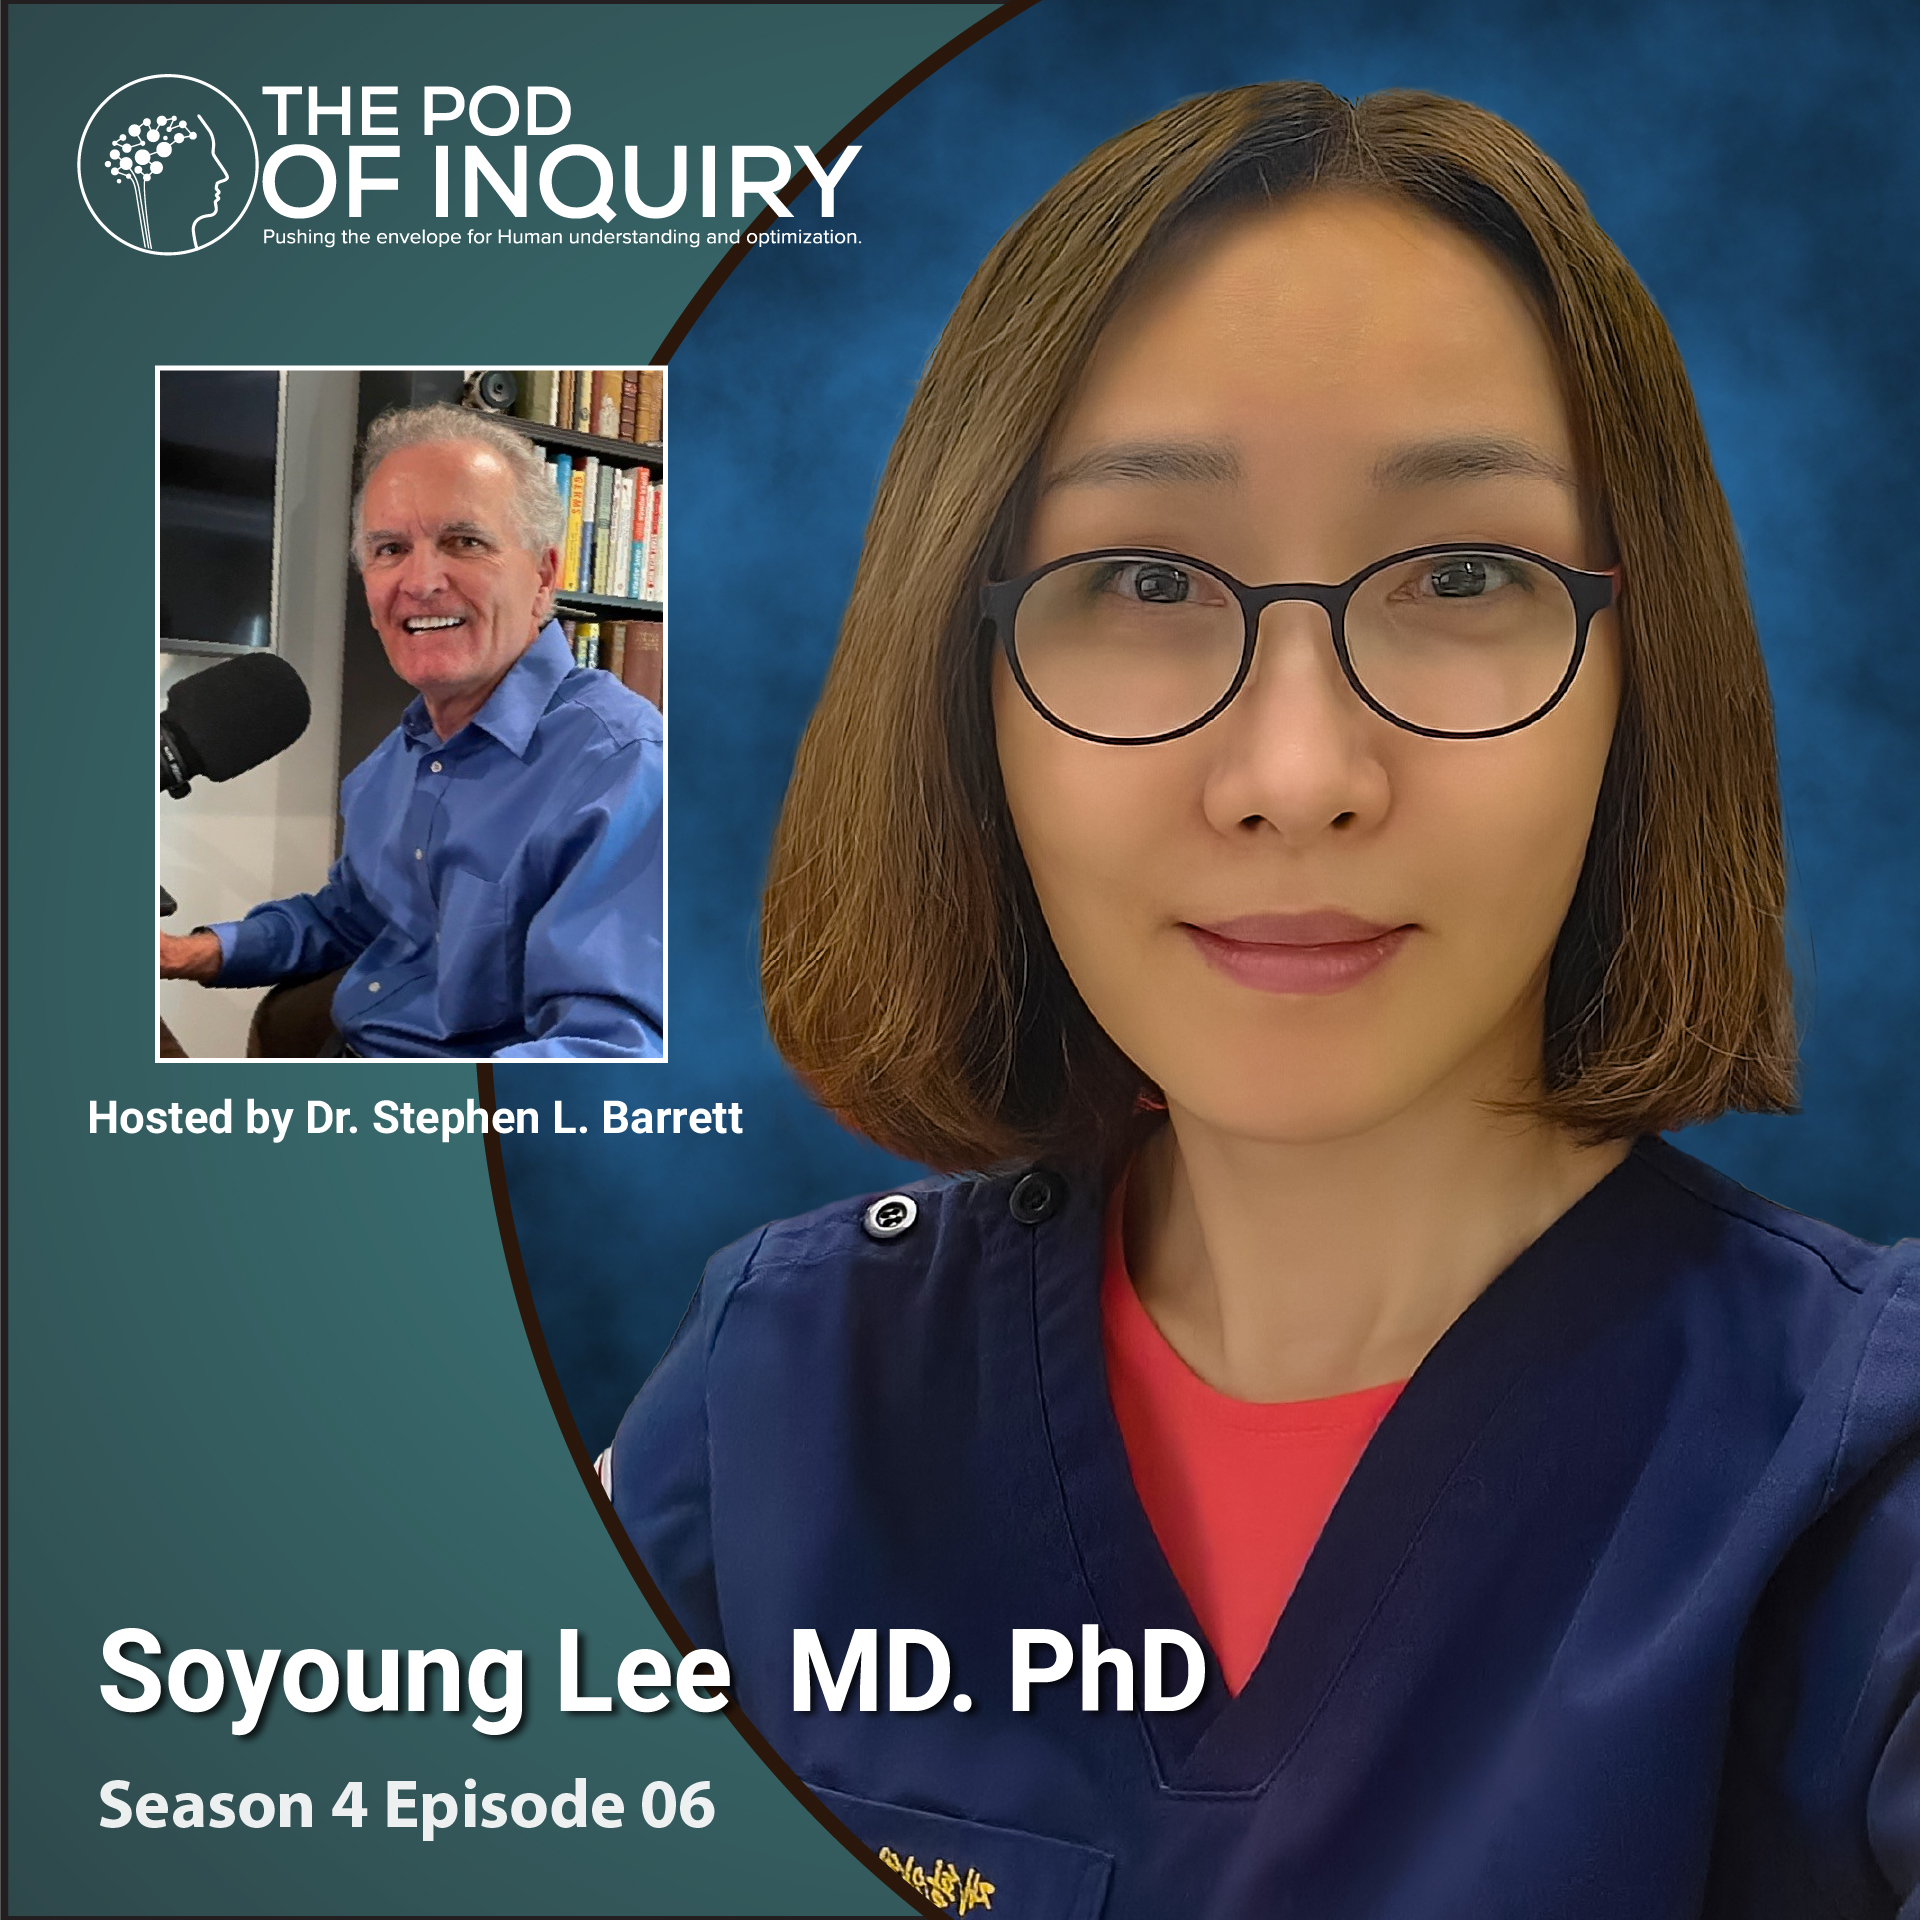 Combining Physical Medicine and Rehab with Podiatric Medicine SoYoung Lee, M.D.